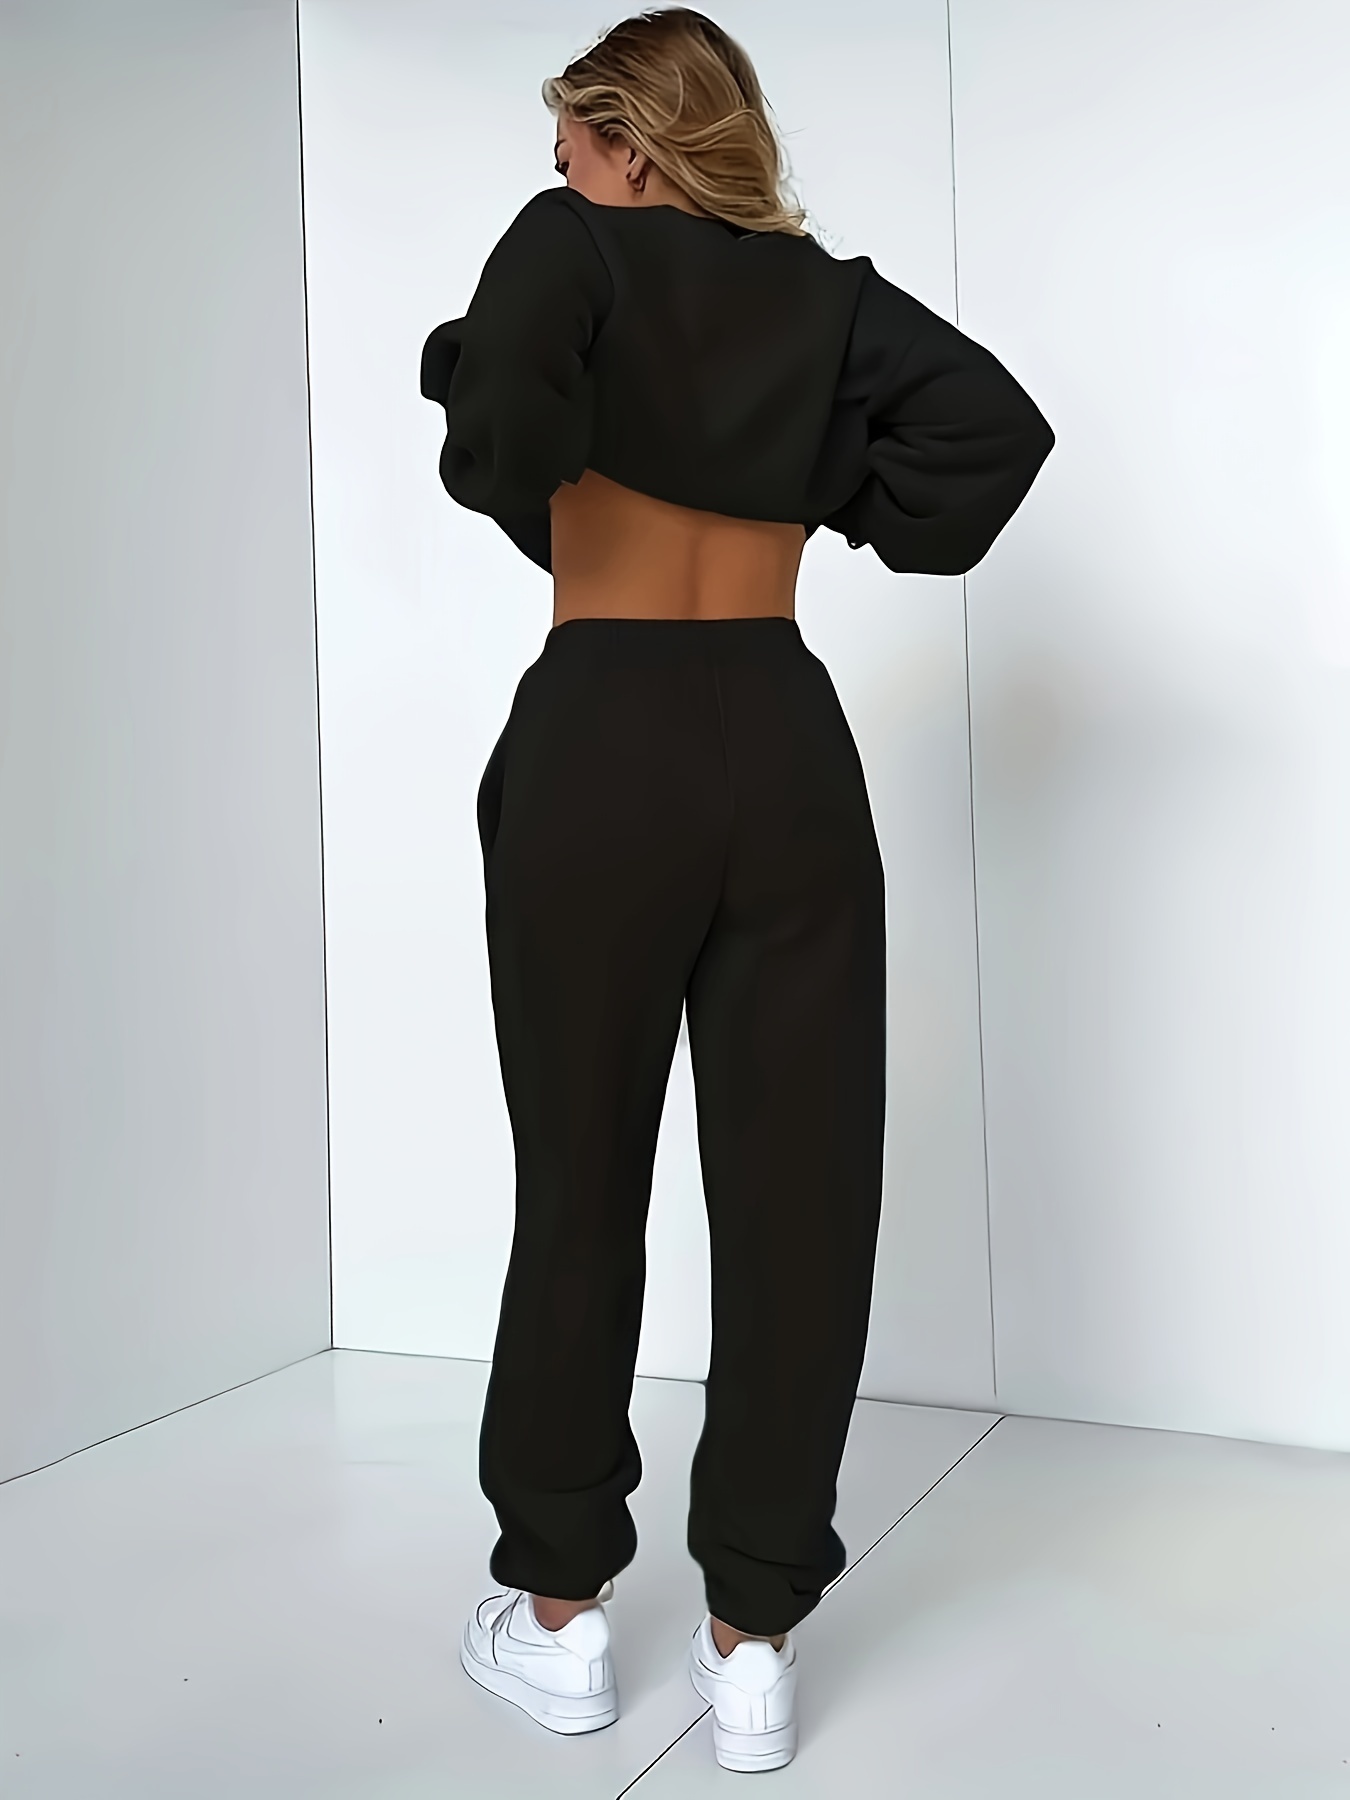 2 Piece Lounge Set Women 1/4 Zip Cropped Sweatsuit Fashion Clothing Casual  Pullover and Sweatpants Outfits Travel Sets